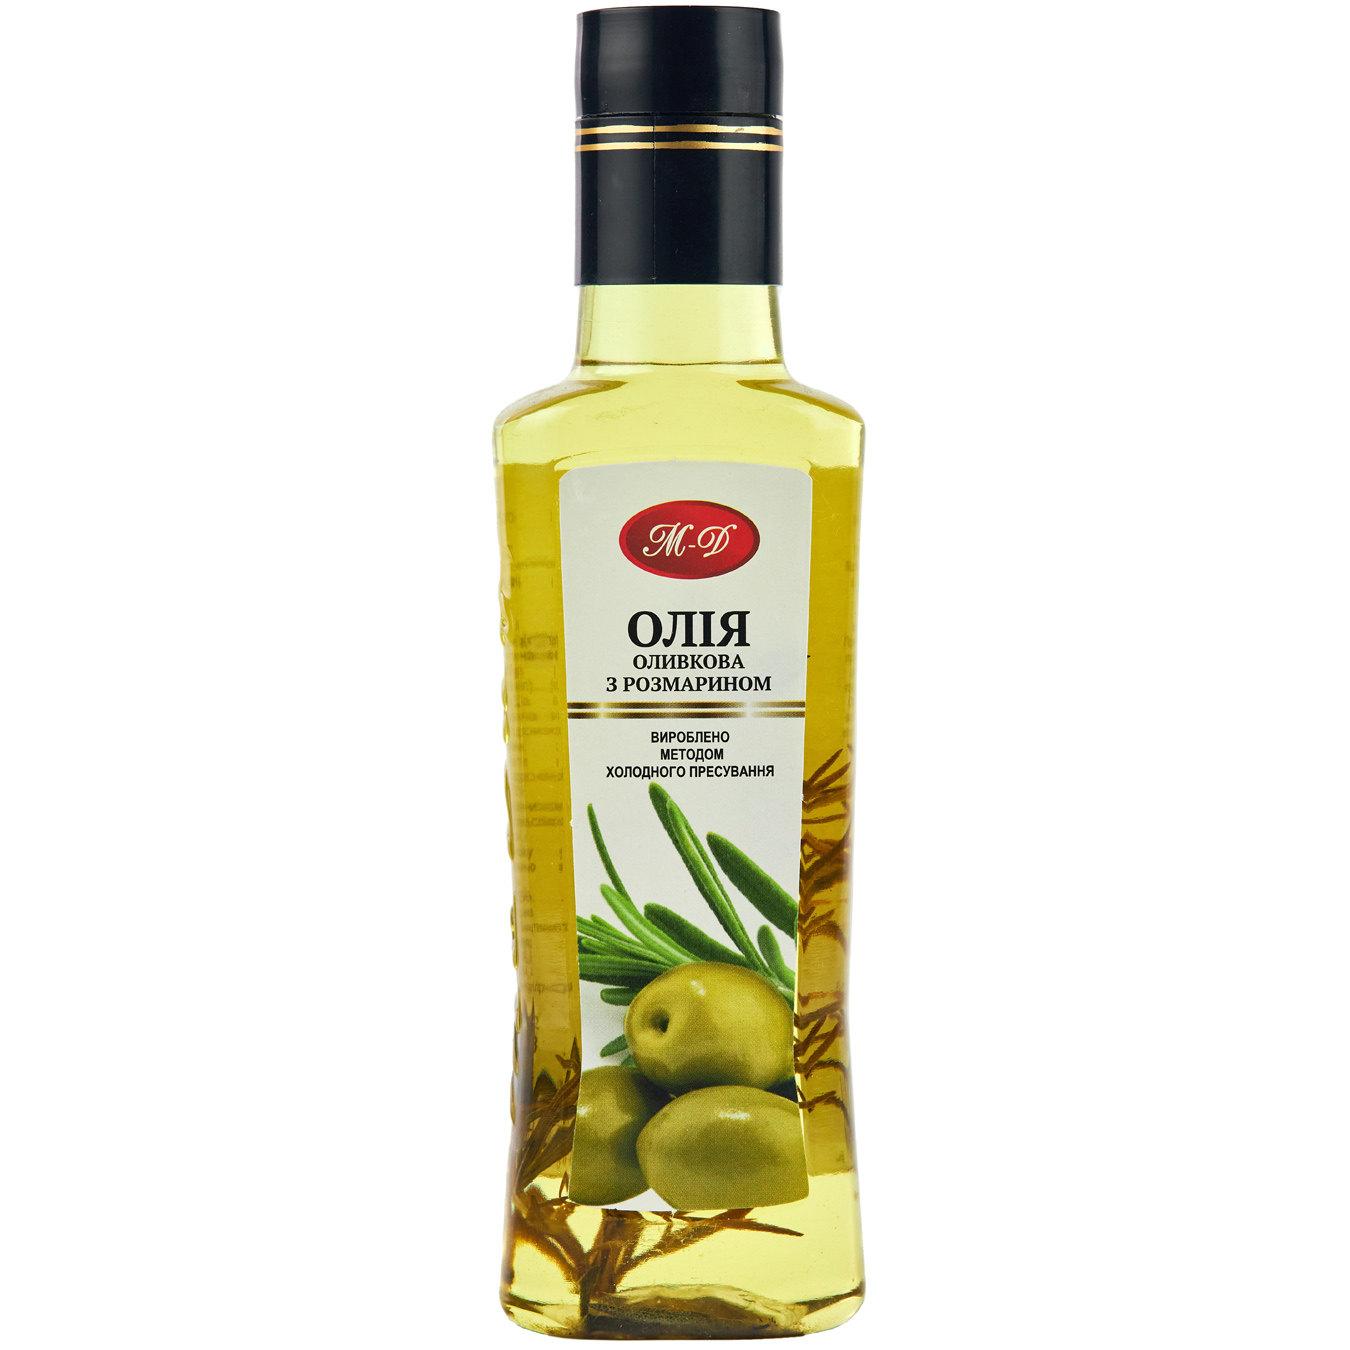 McDay olive oil with rosemary 200ml